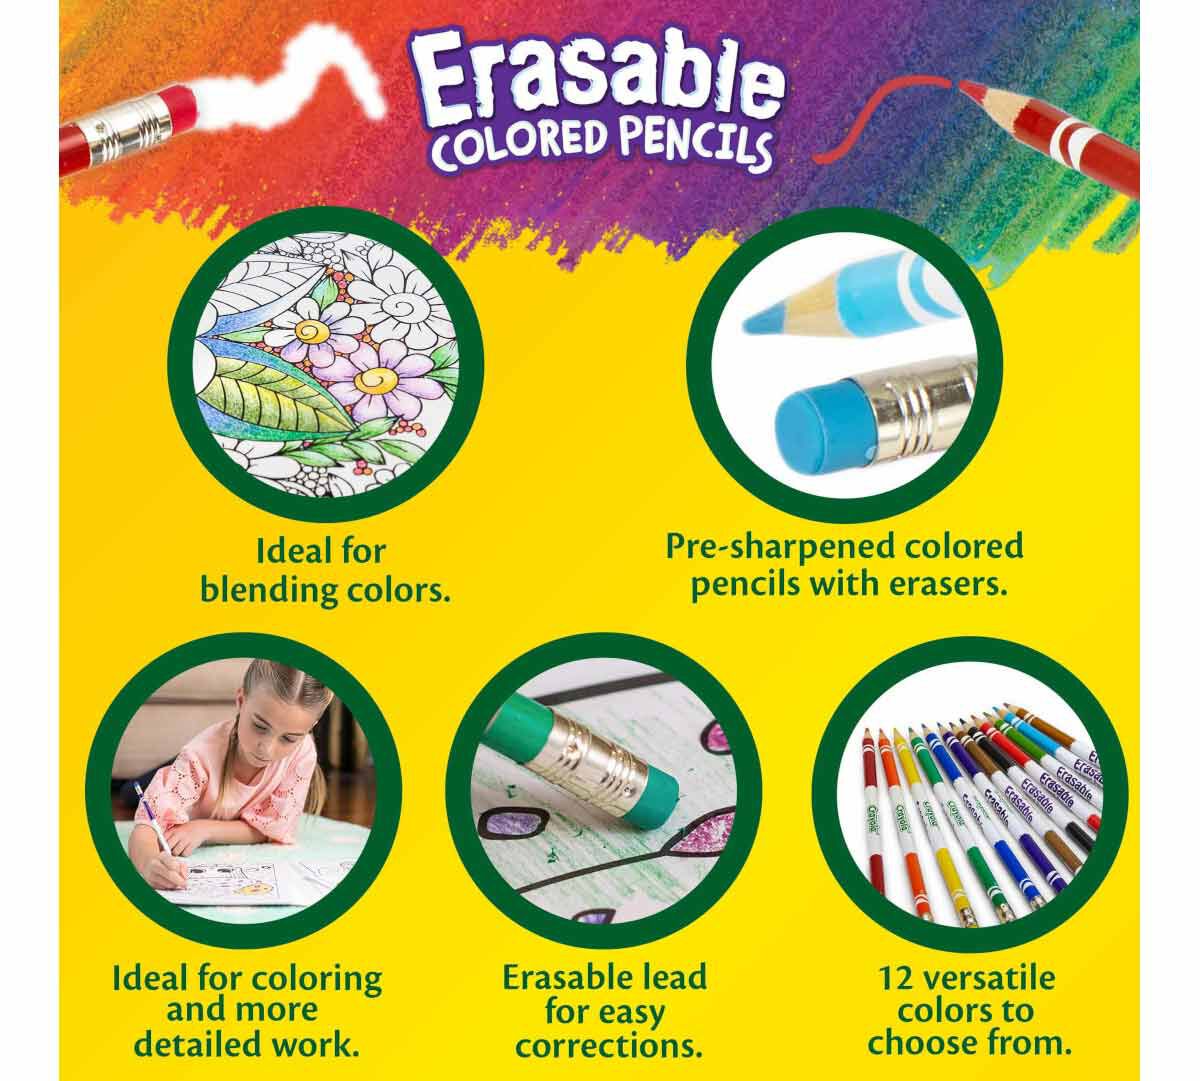 36 X Crayola Erasable Colored Pencils Art Tools Ages 4 5 6 7 Toys Games Kids Gif 